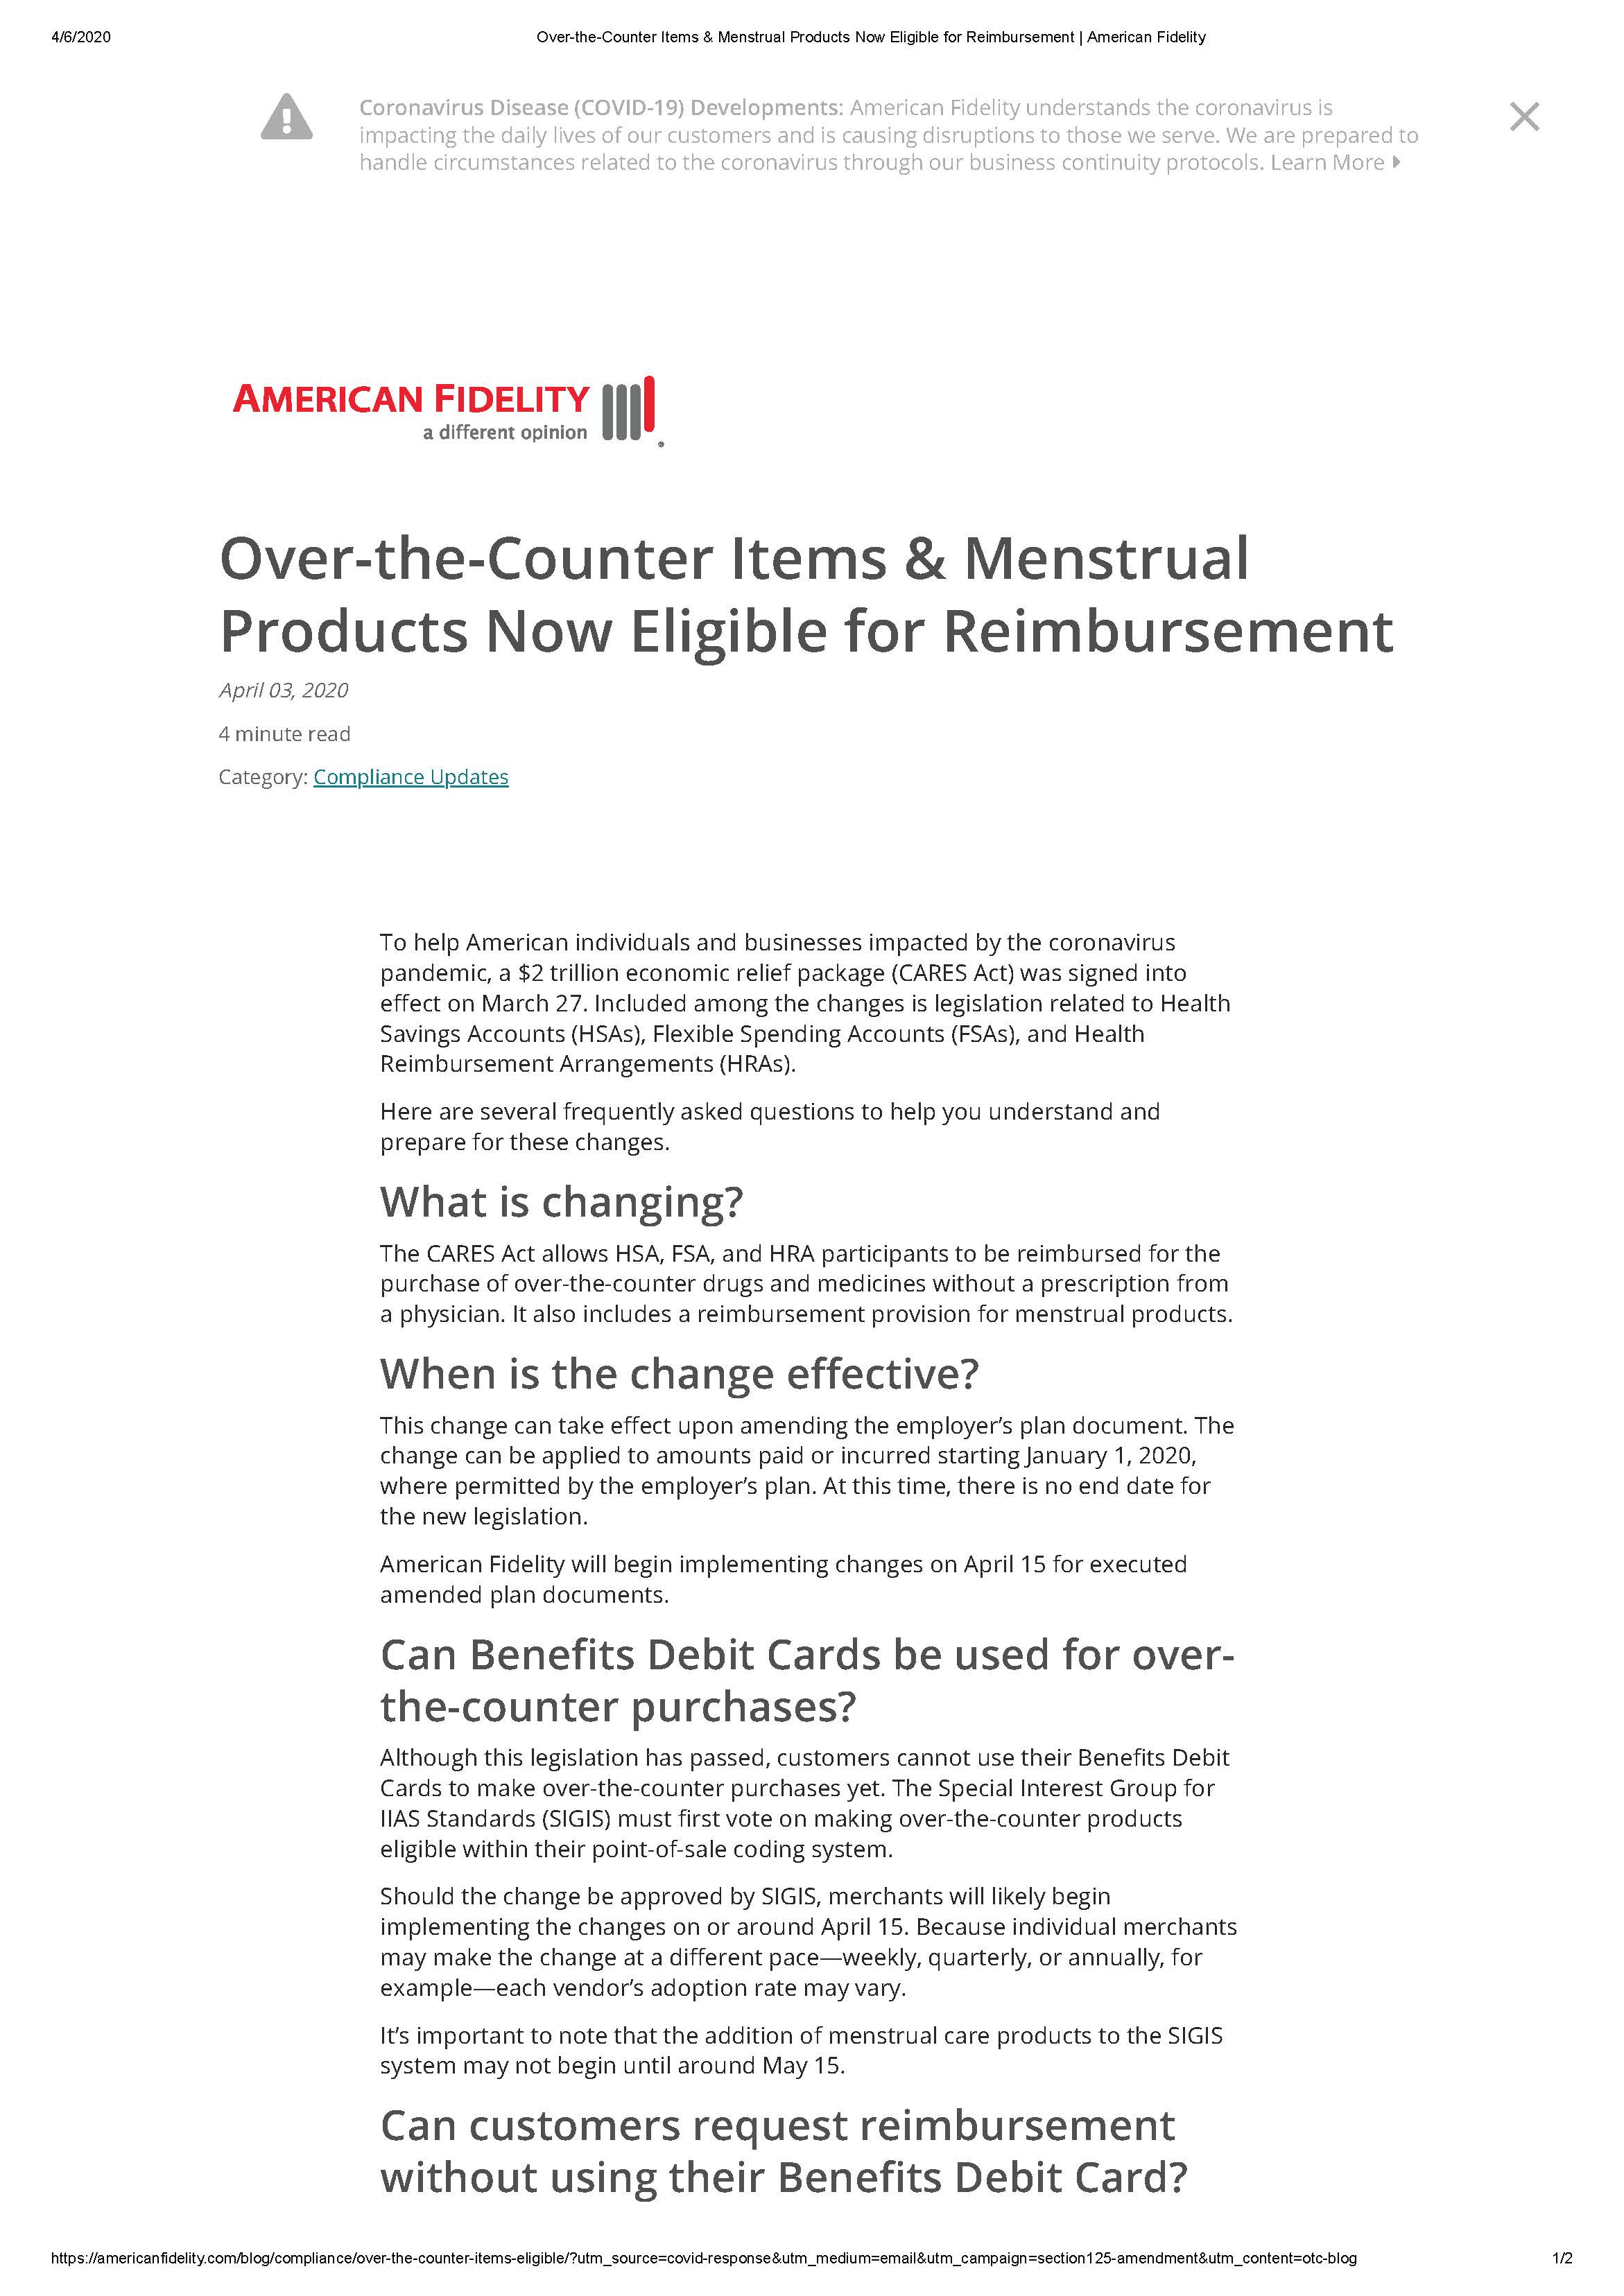 Over-the-Counter Items & Menstrual Products Eligible for Reimbursment Page 1